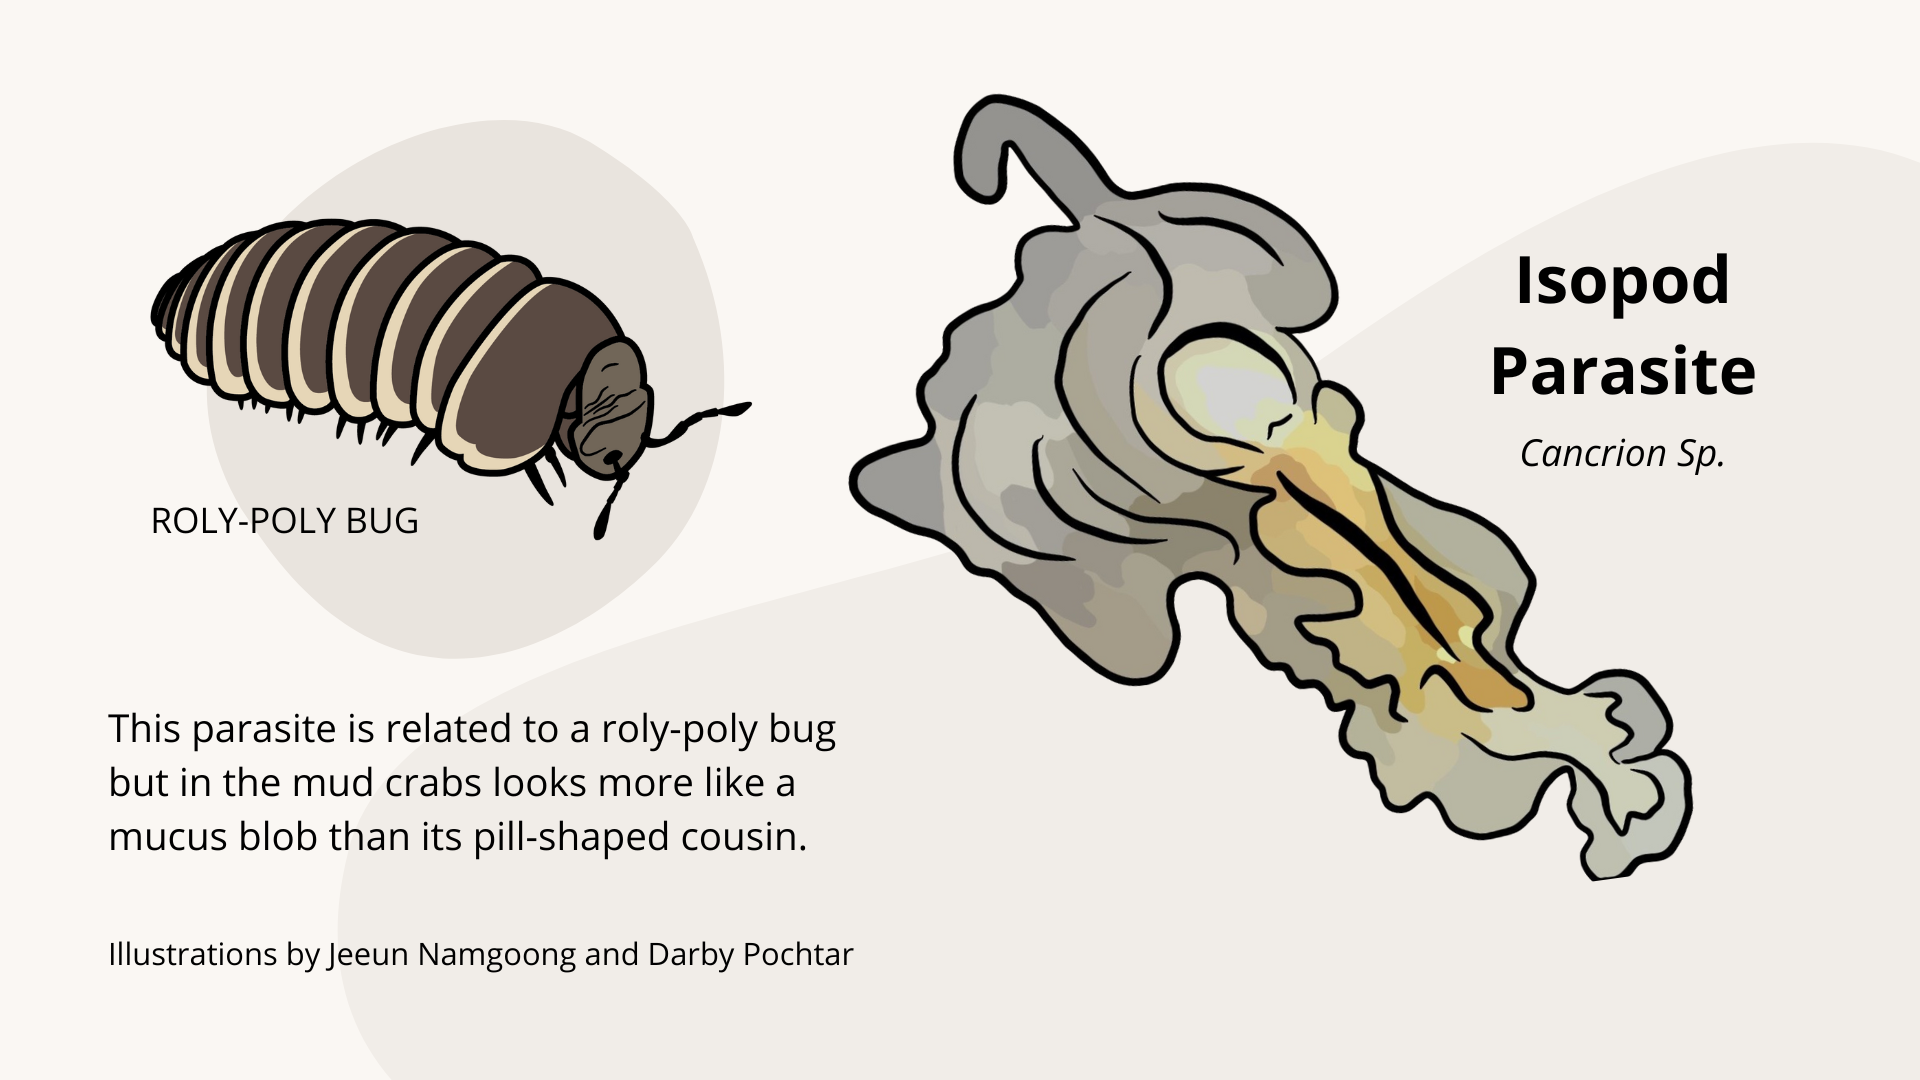 Isopod Parasite: This parasite is related to a roly-poly bug but in the mud crabs looks more like a mucus blob than its pill-shaped cousin.